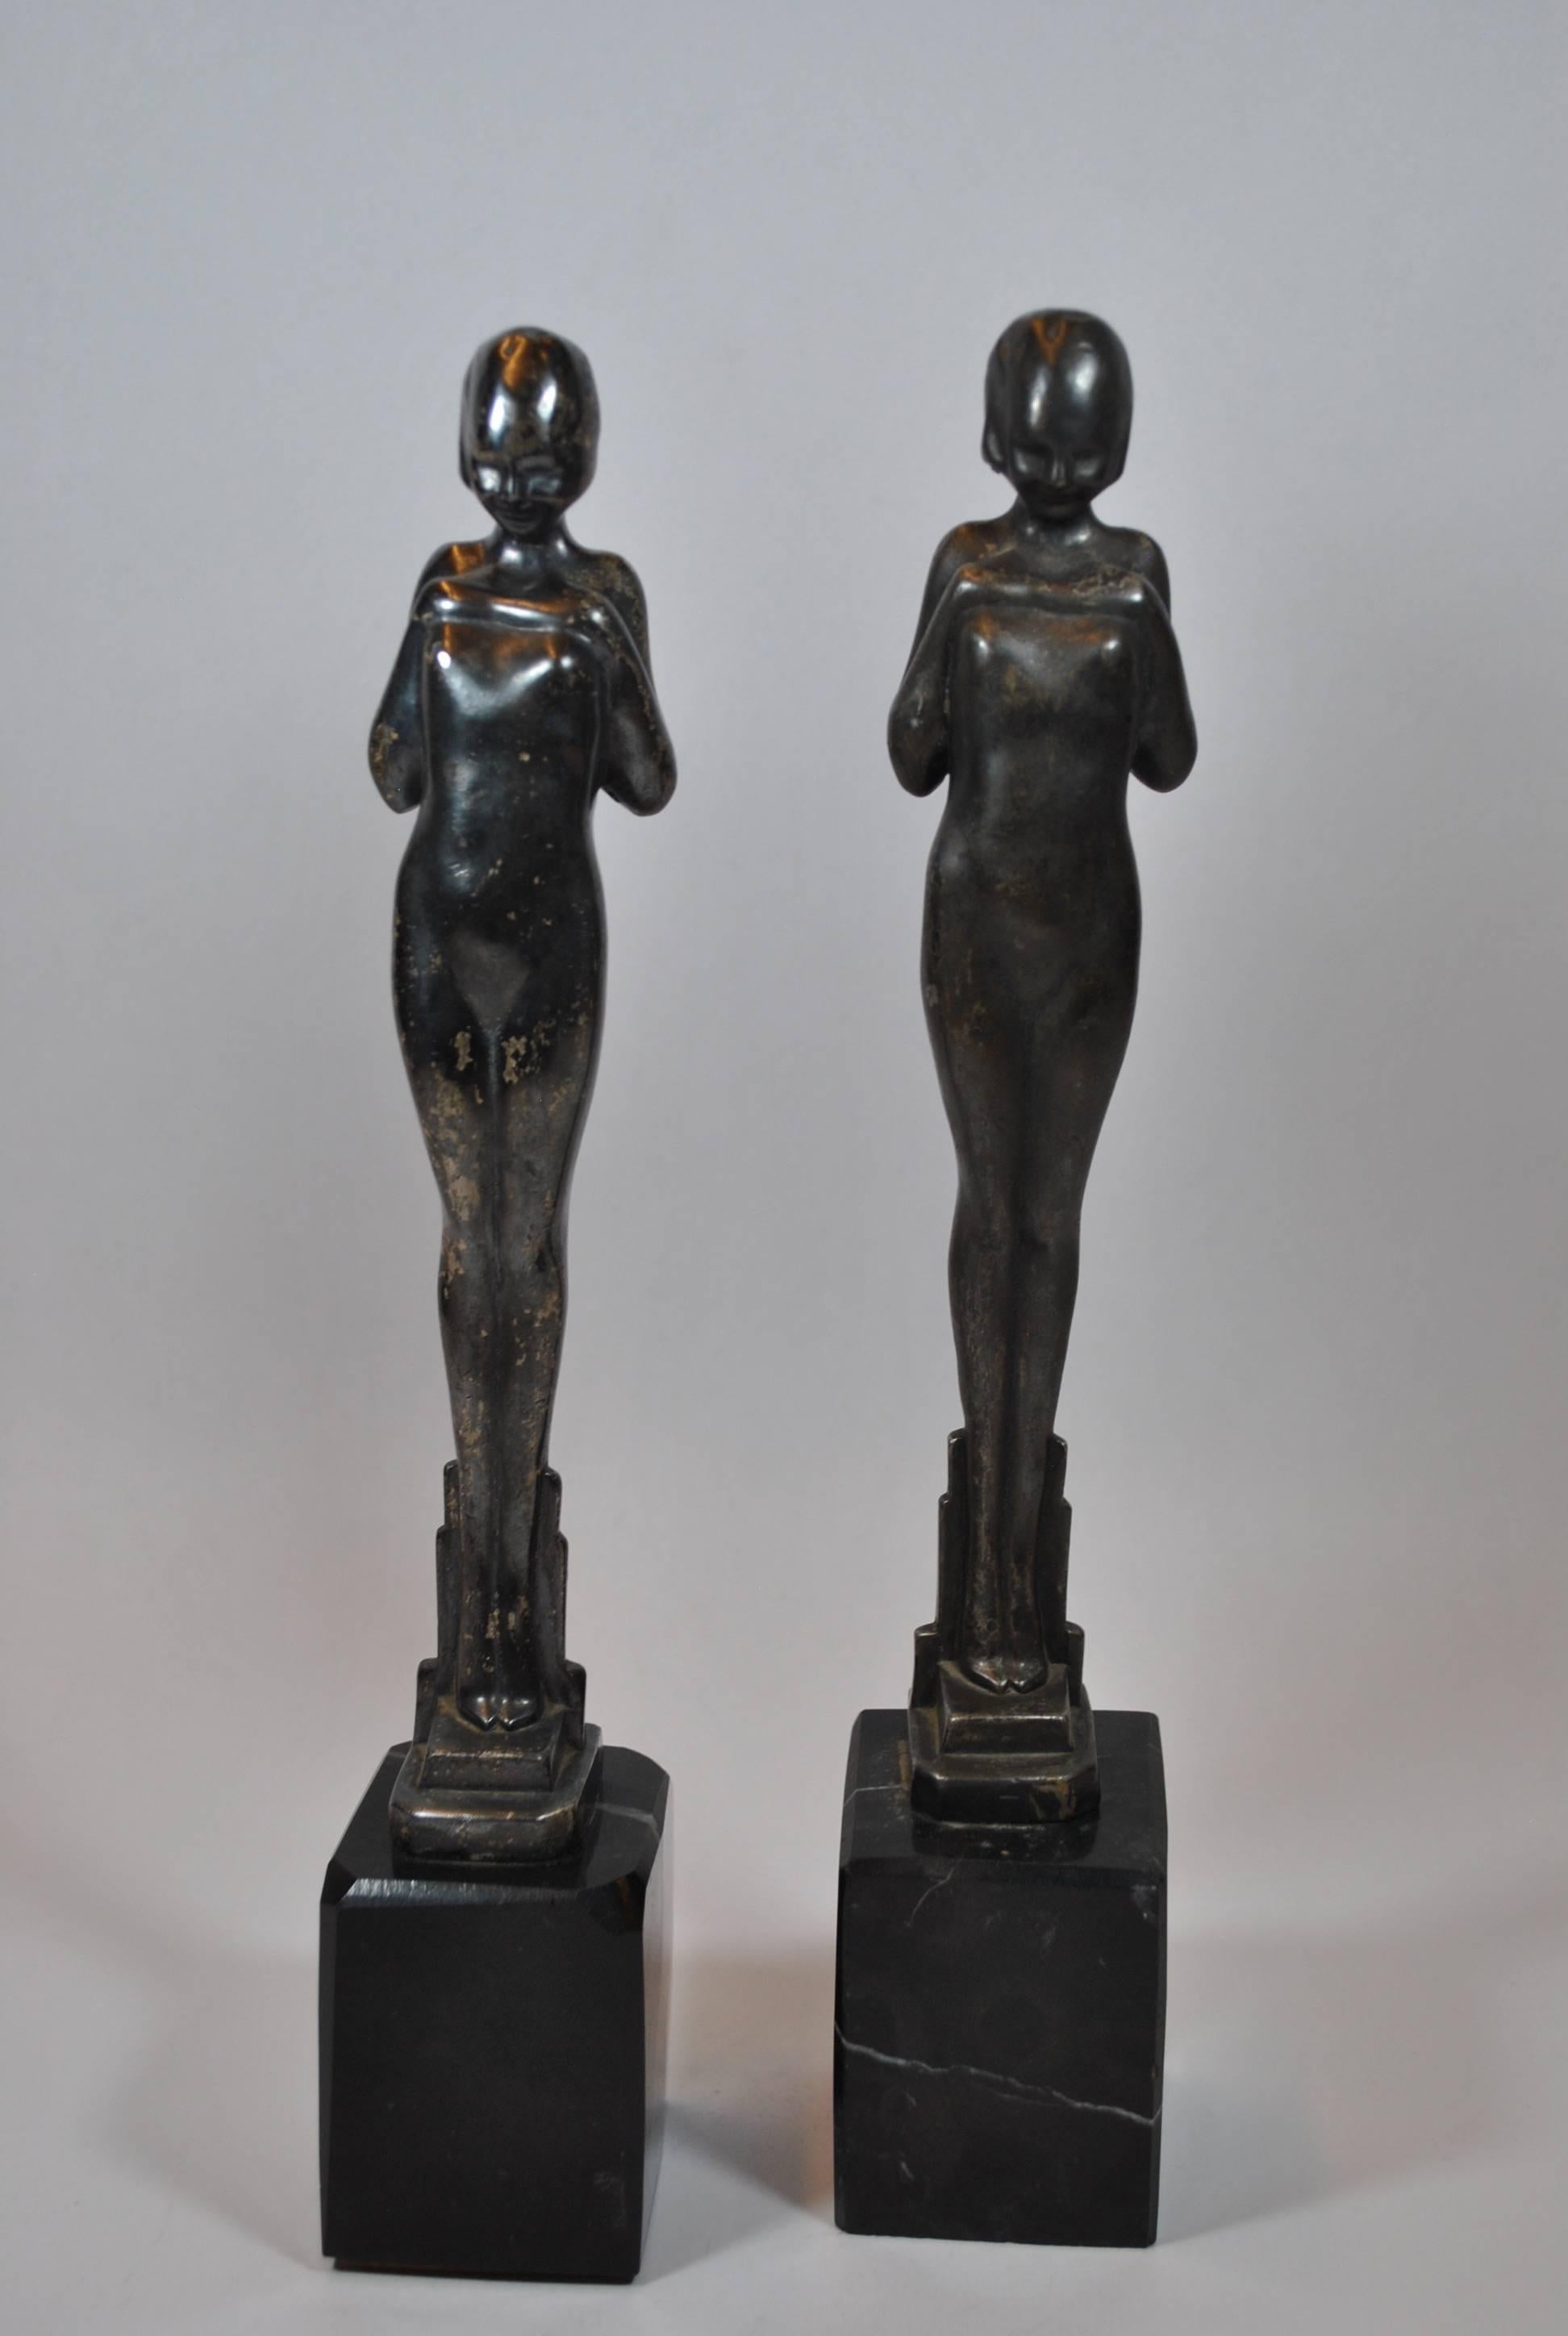 Designed by sculptor Arthur von Frankenberg for Frankart at 1170 Broadway and 28th, N.Y. (1922-1932). They manufactured utilitarian household objects such as lamps, ashtrays, bookends, vases, smoker´s sets, stands, etc. portraying solely the female